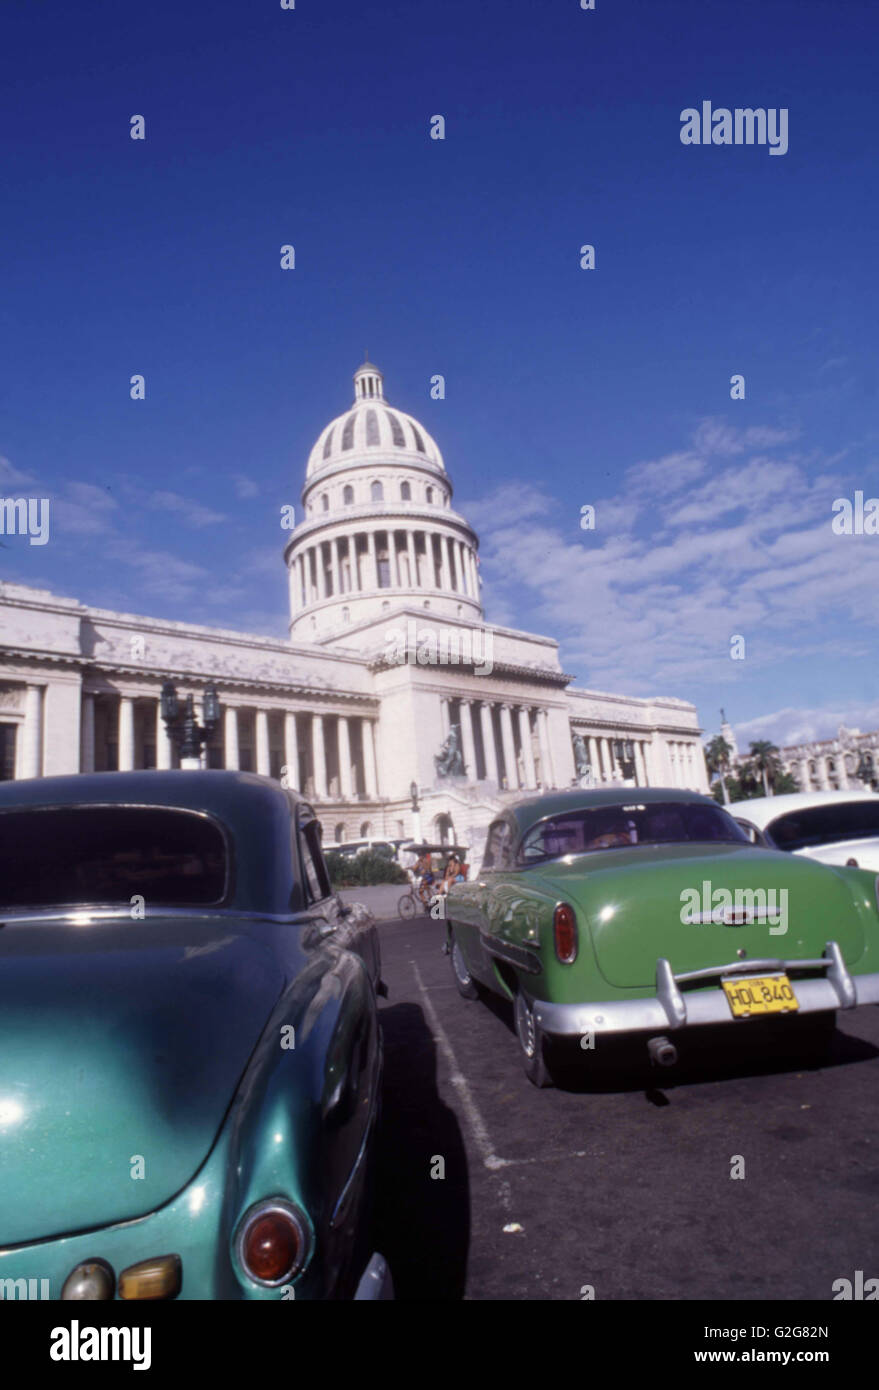 American Classic Cars (1953 Chevrolet Bel Air in Green, Pontiac in Turquoise) in front of the Capital Building in Havana, Cuba Stock Photo